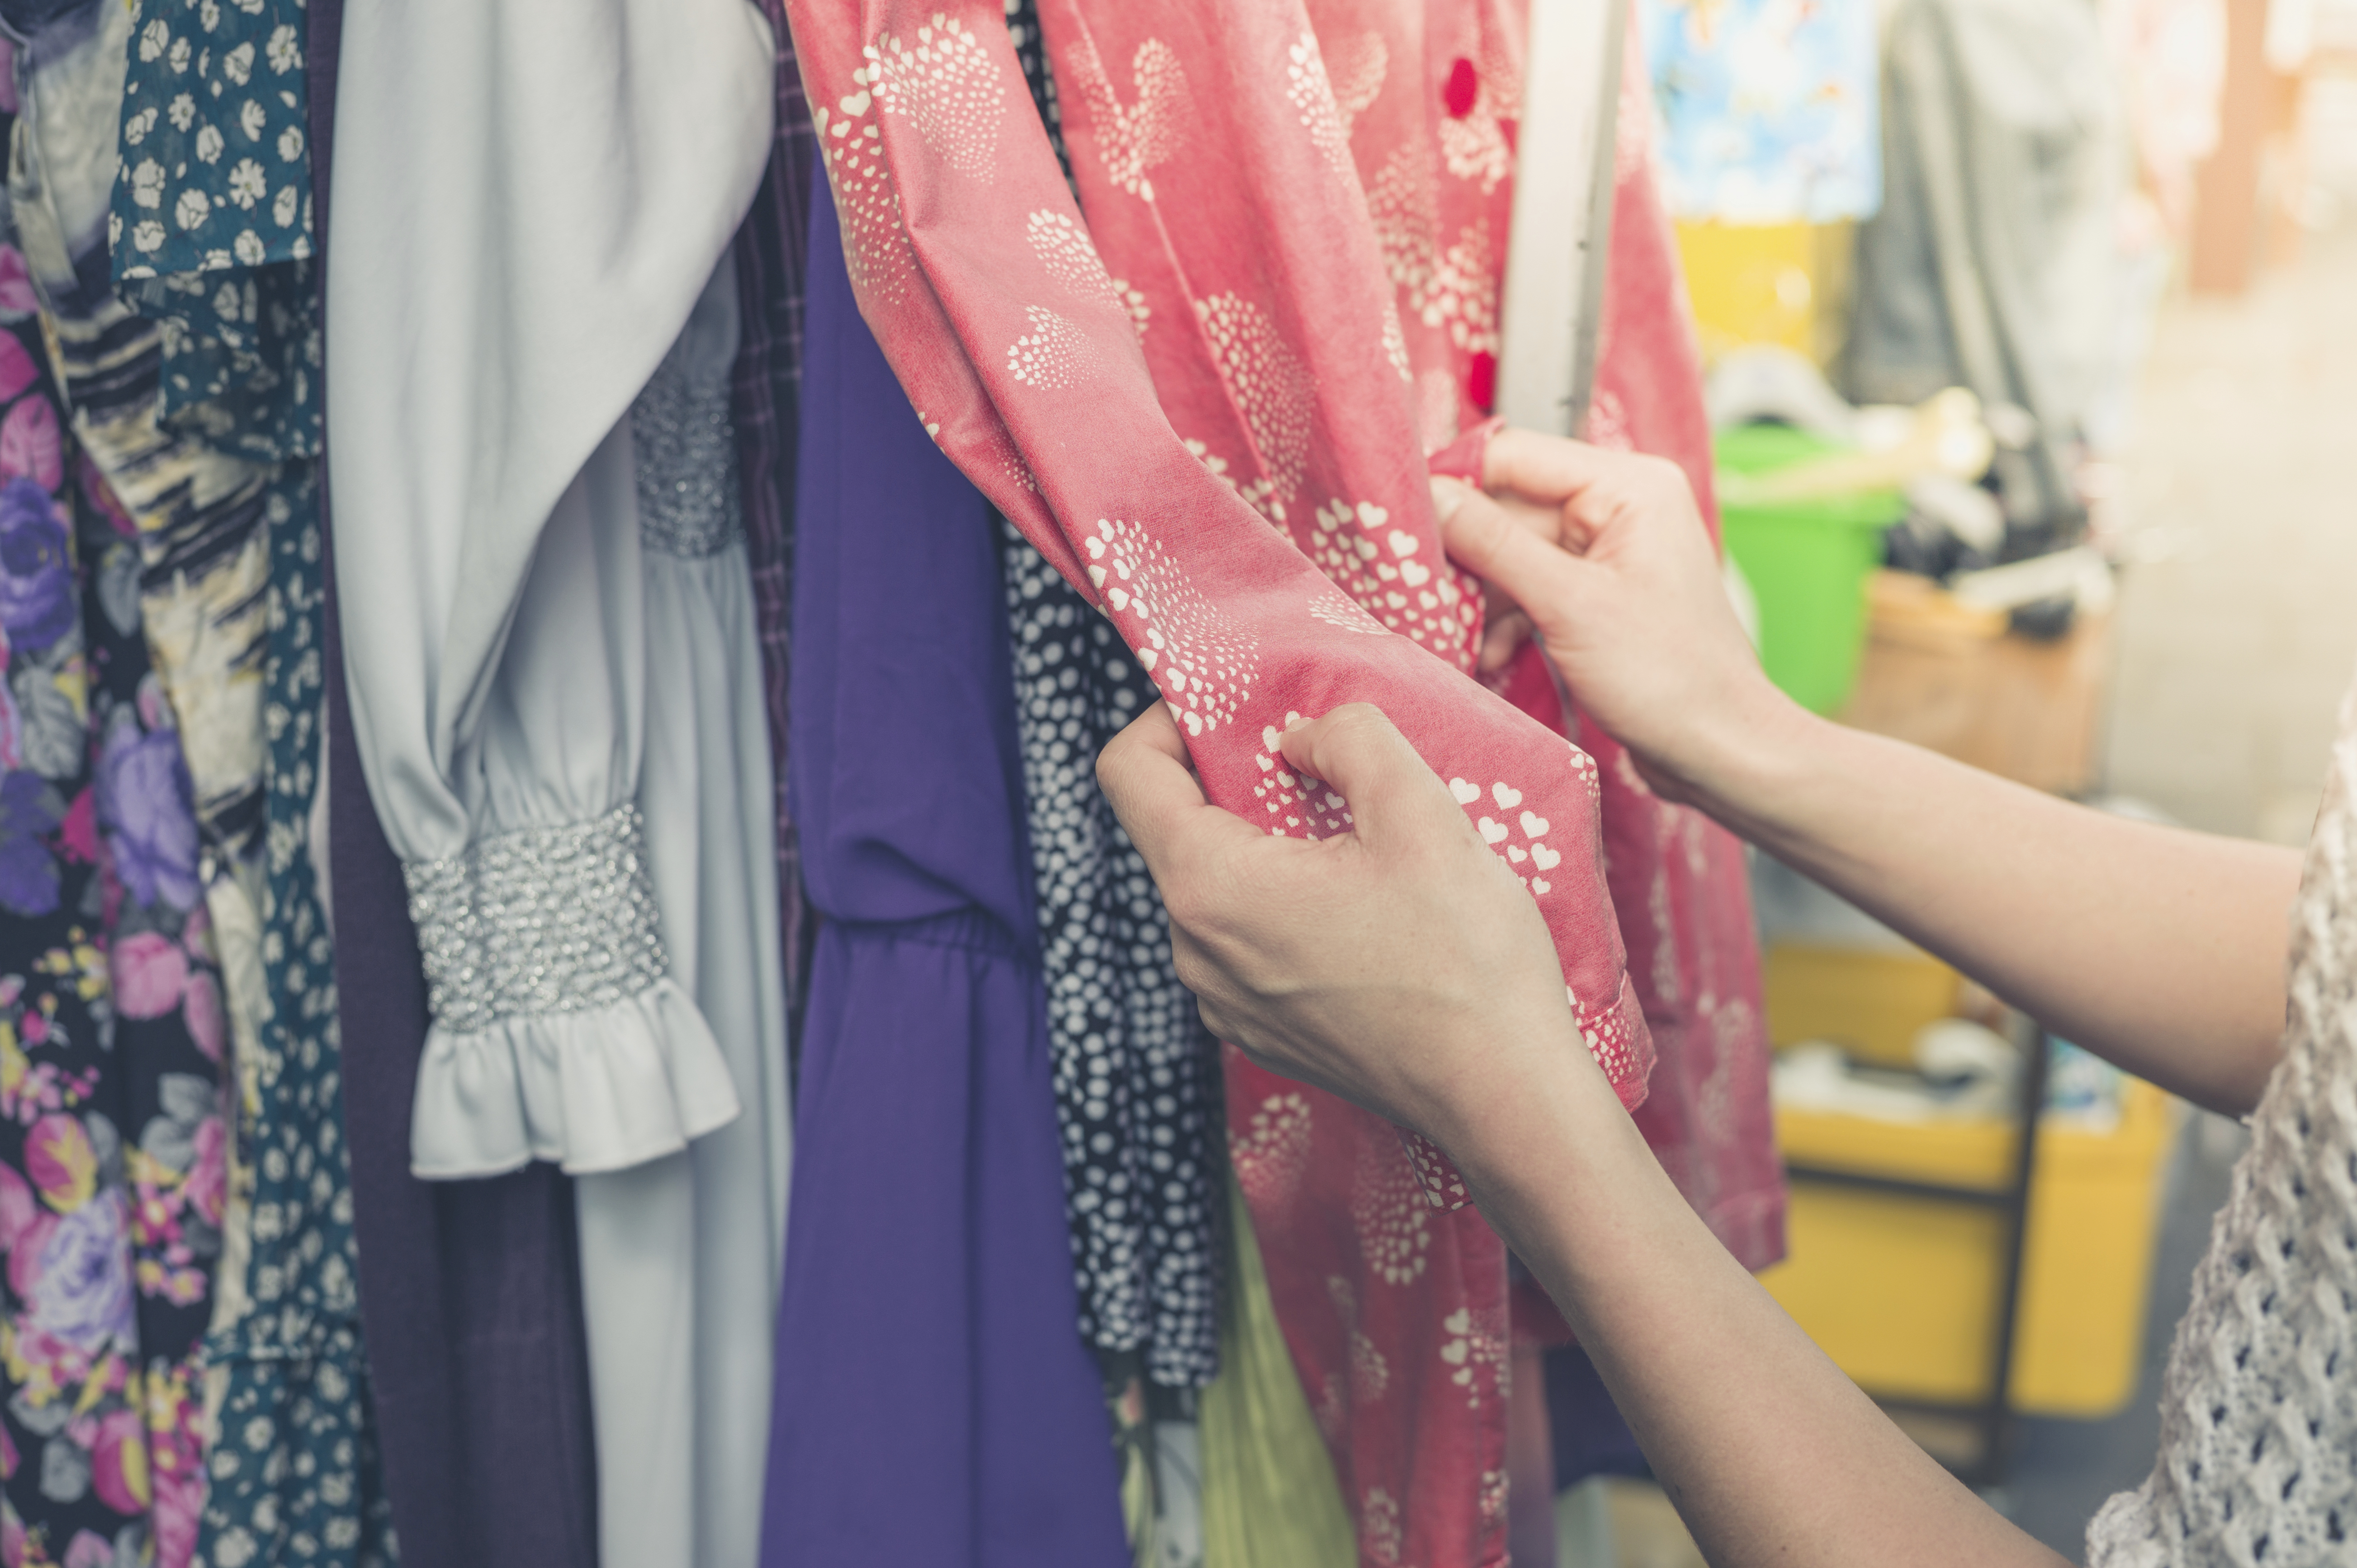 A woman browsing clothing in a charity shop